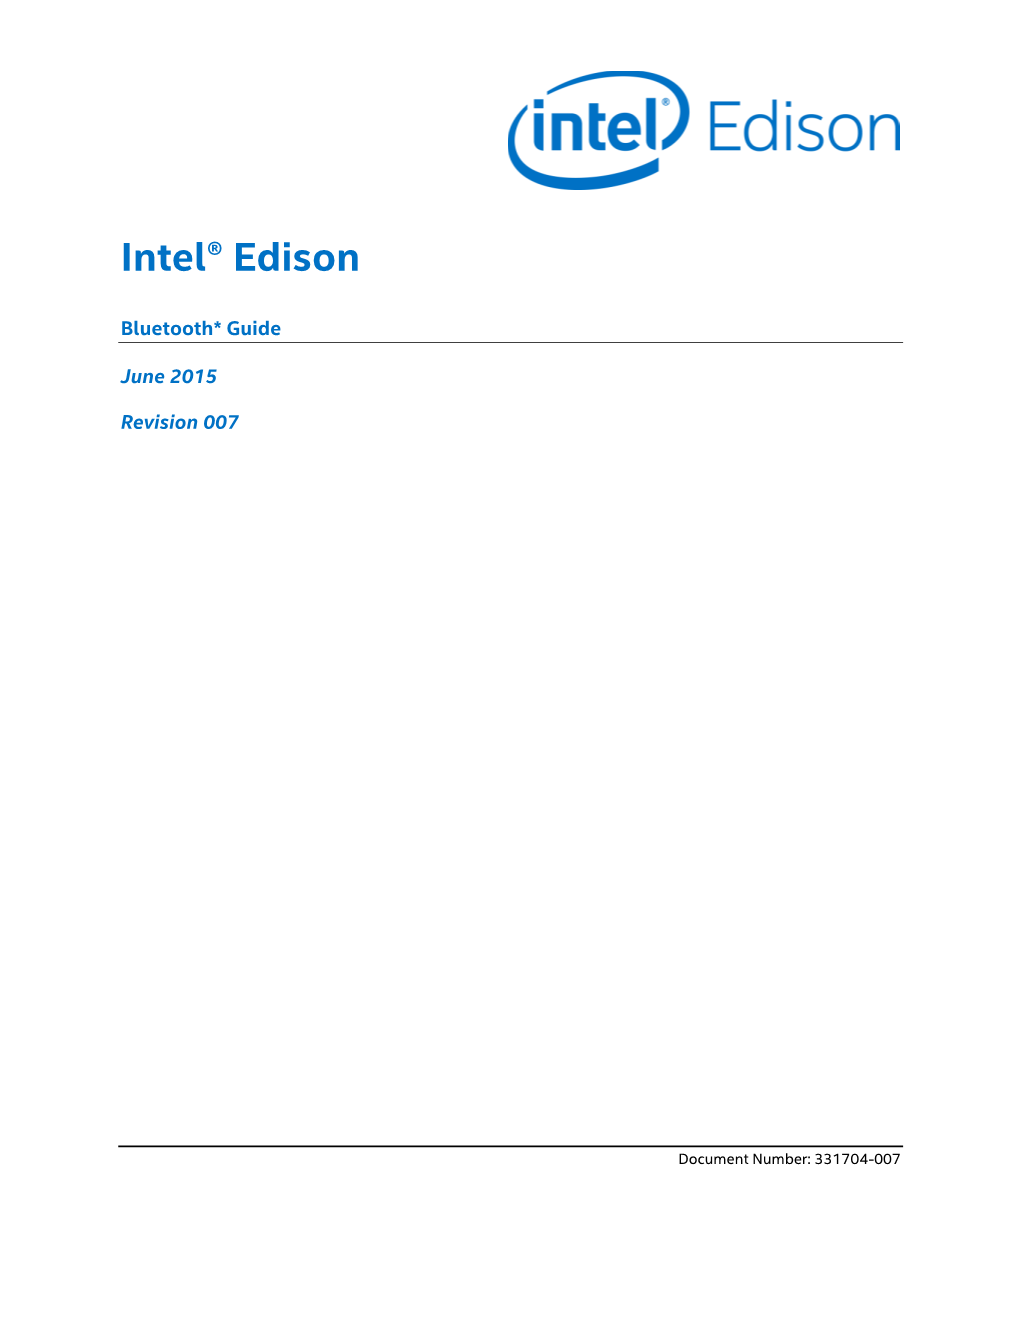 Intel® Edison Bluetooth* Guide June 2015 2 Document Number: 331704-007